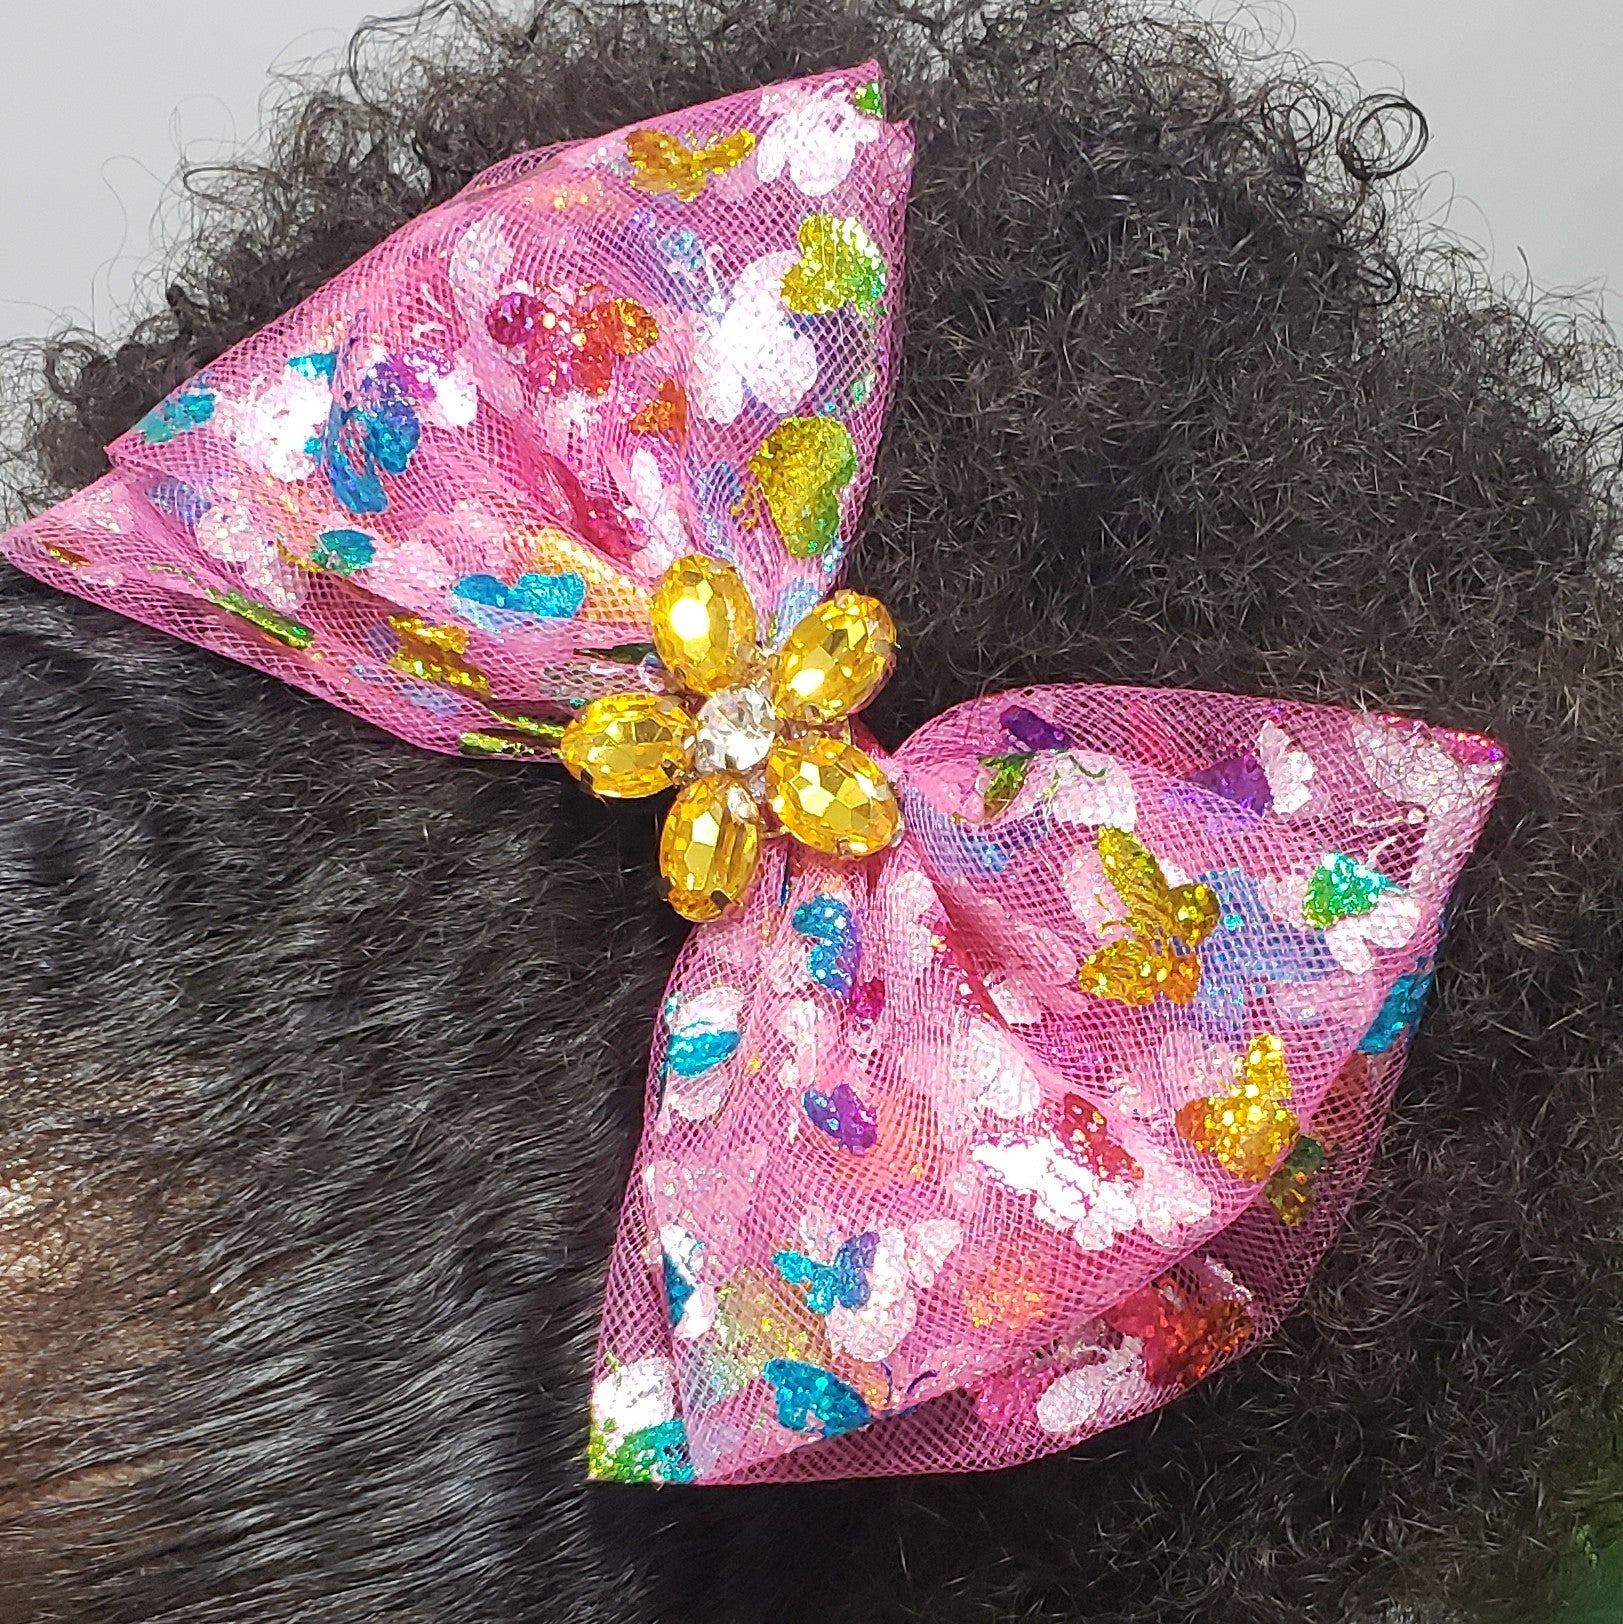 Danielle Butterflies & Amber Flower Bow in Pink Multi Tulle - Houzz of DVA Boutique